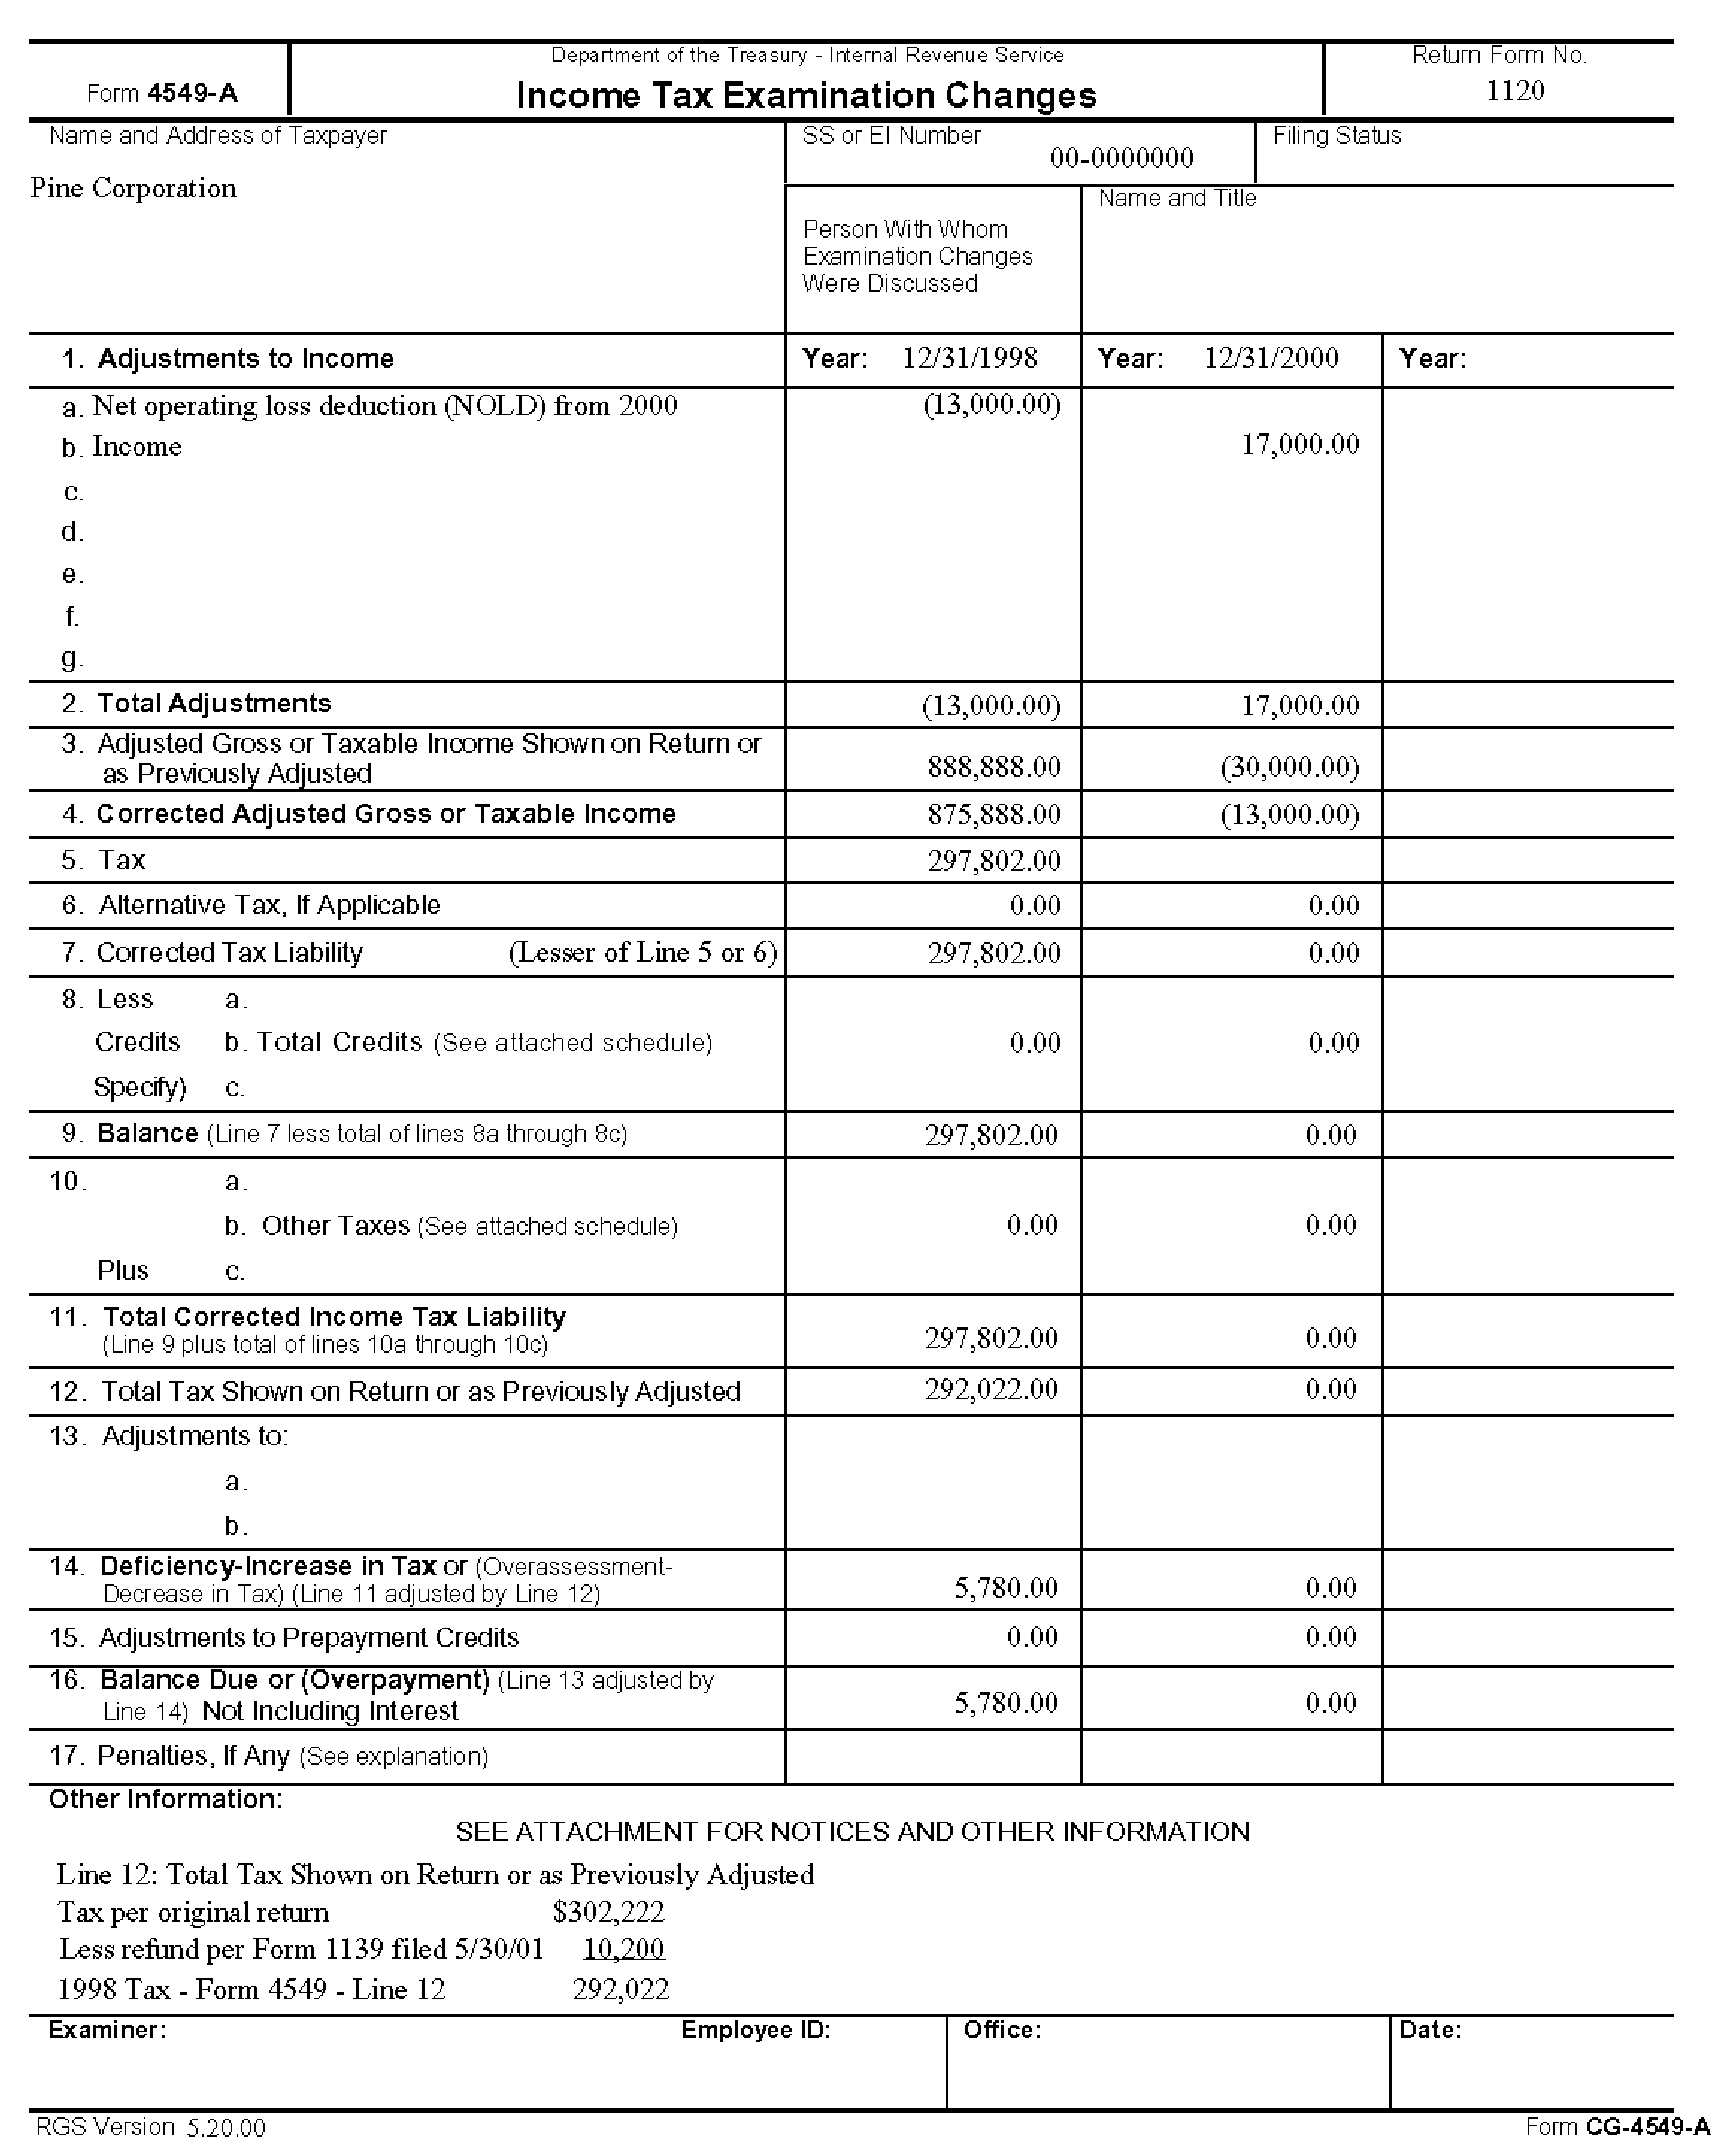 dd form 2977 example for pt